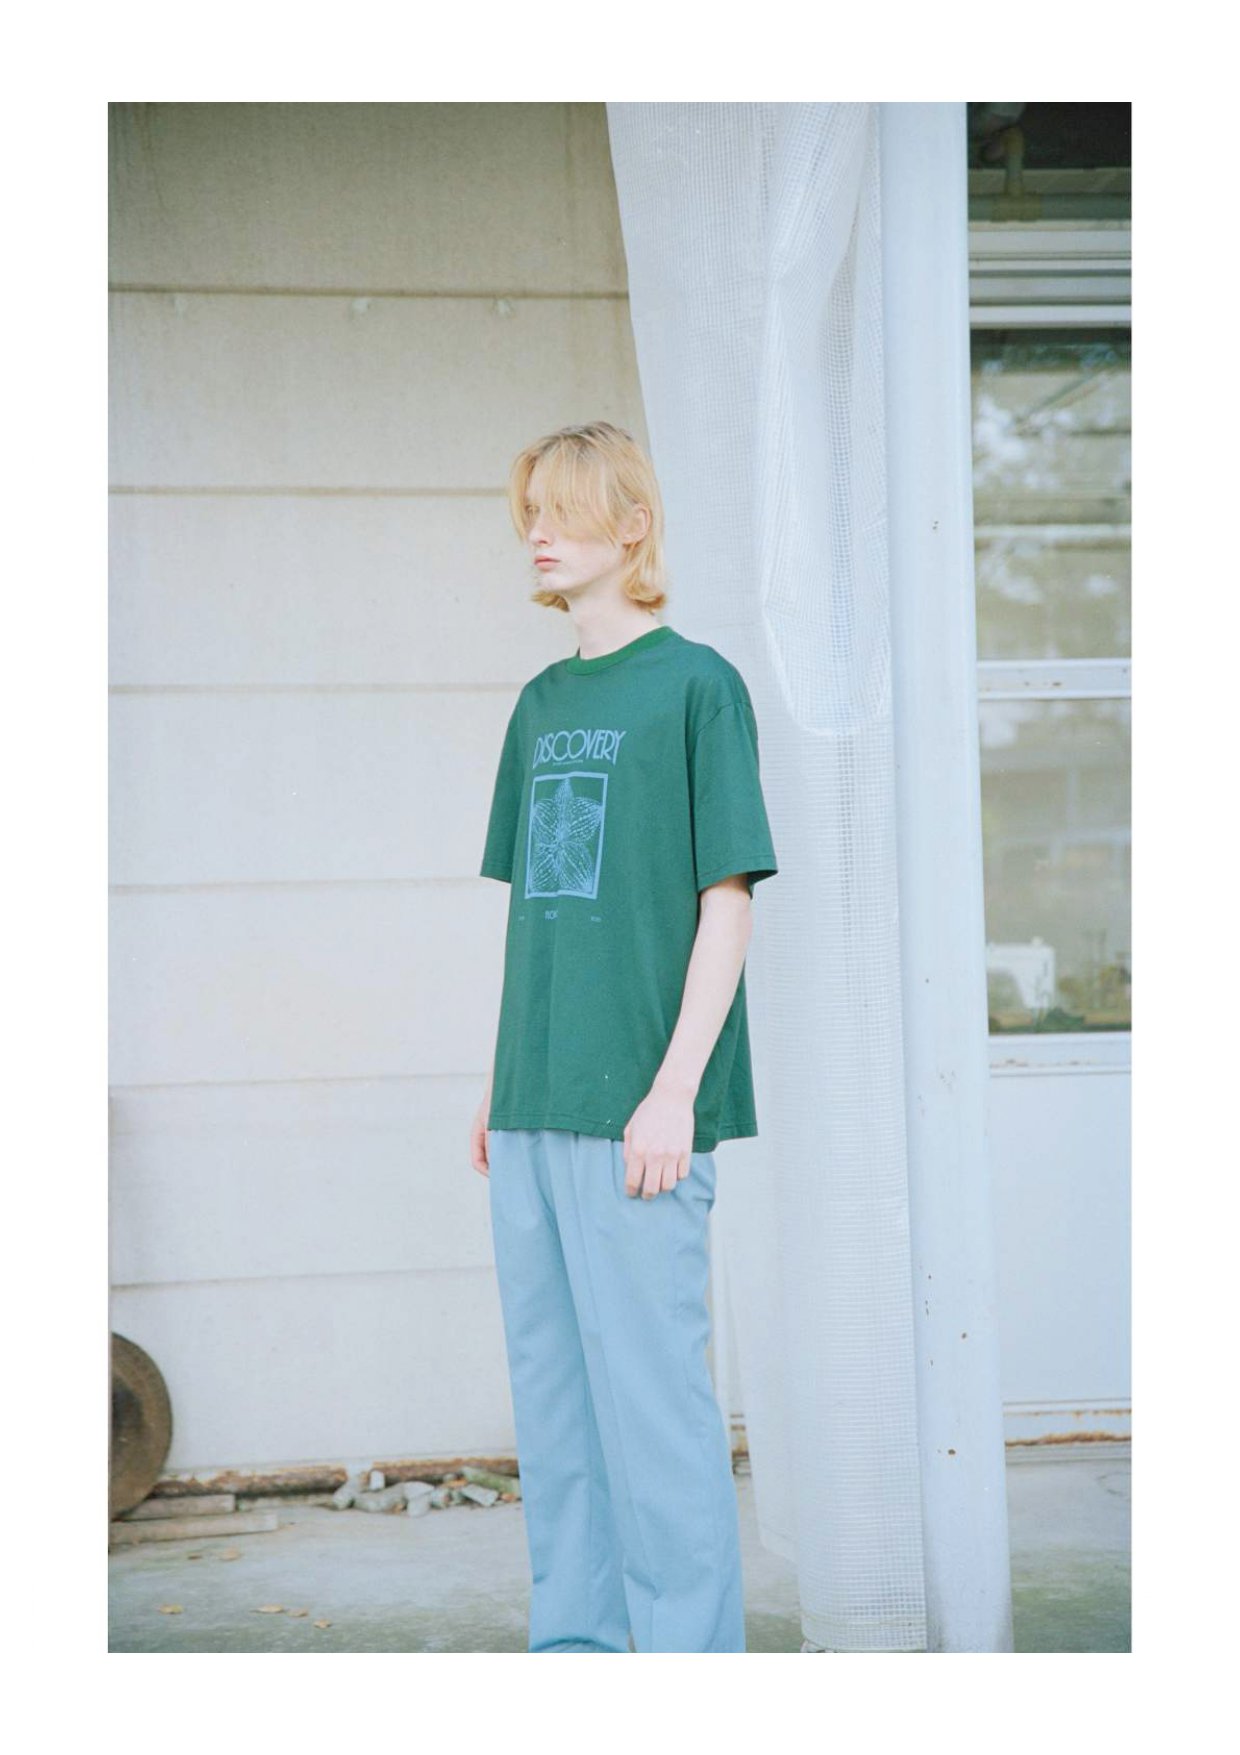 ALLEGE<br />Nature Science Magazine Tee / GREEN<img class='new_mark_img2' src='https://img.shop-pro.jp/img/new/icons14.gif' style='border:none;display:inline;margin:0px;padding:0px;width:auto;' />